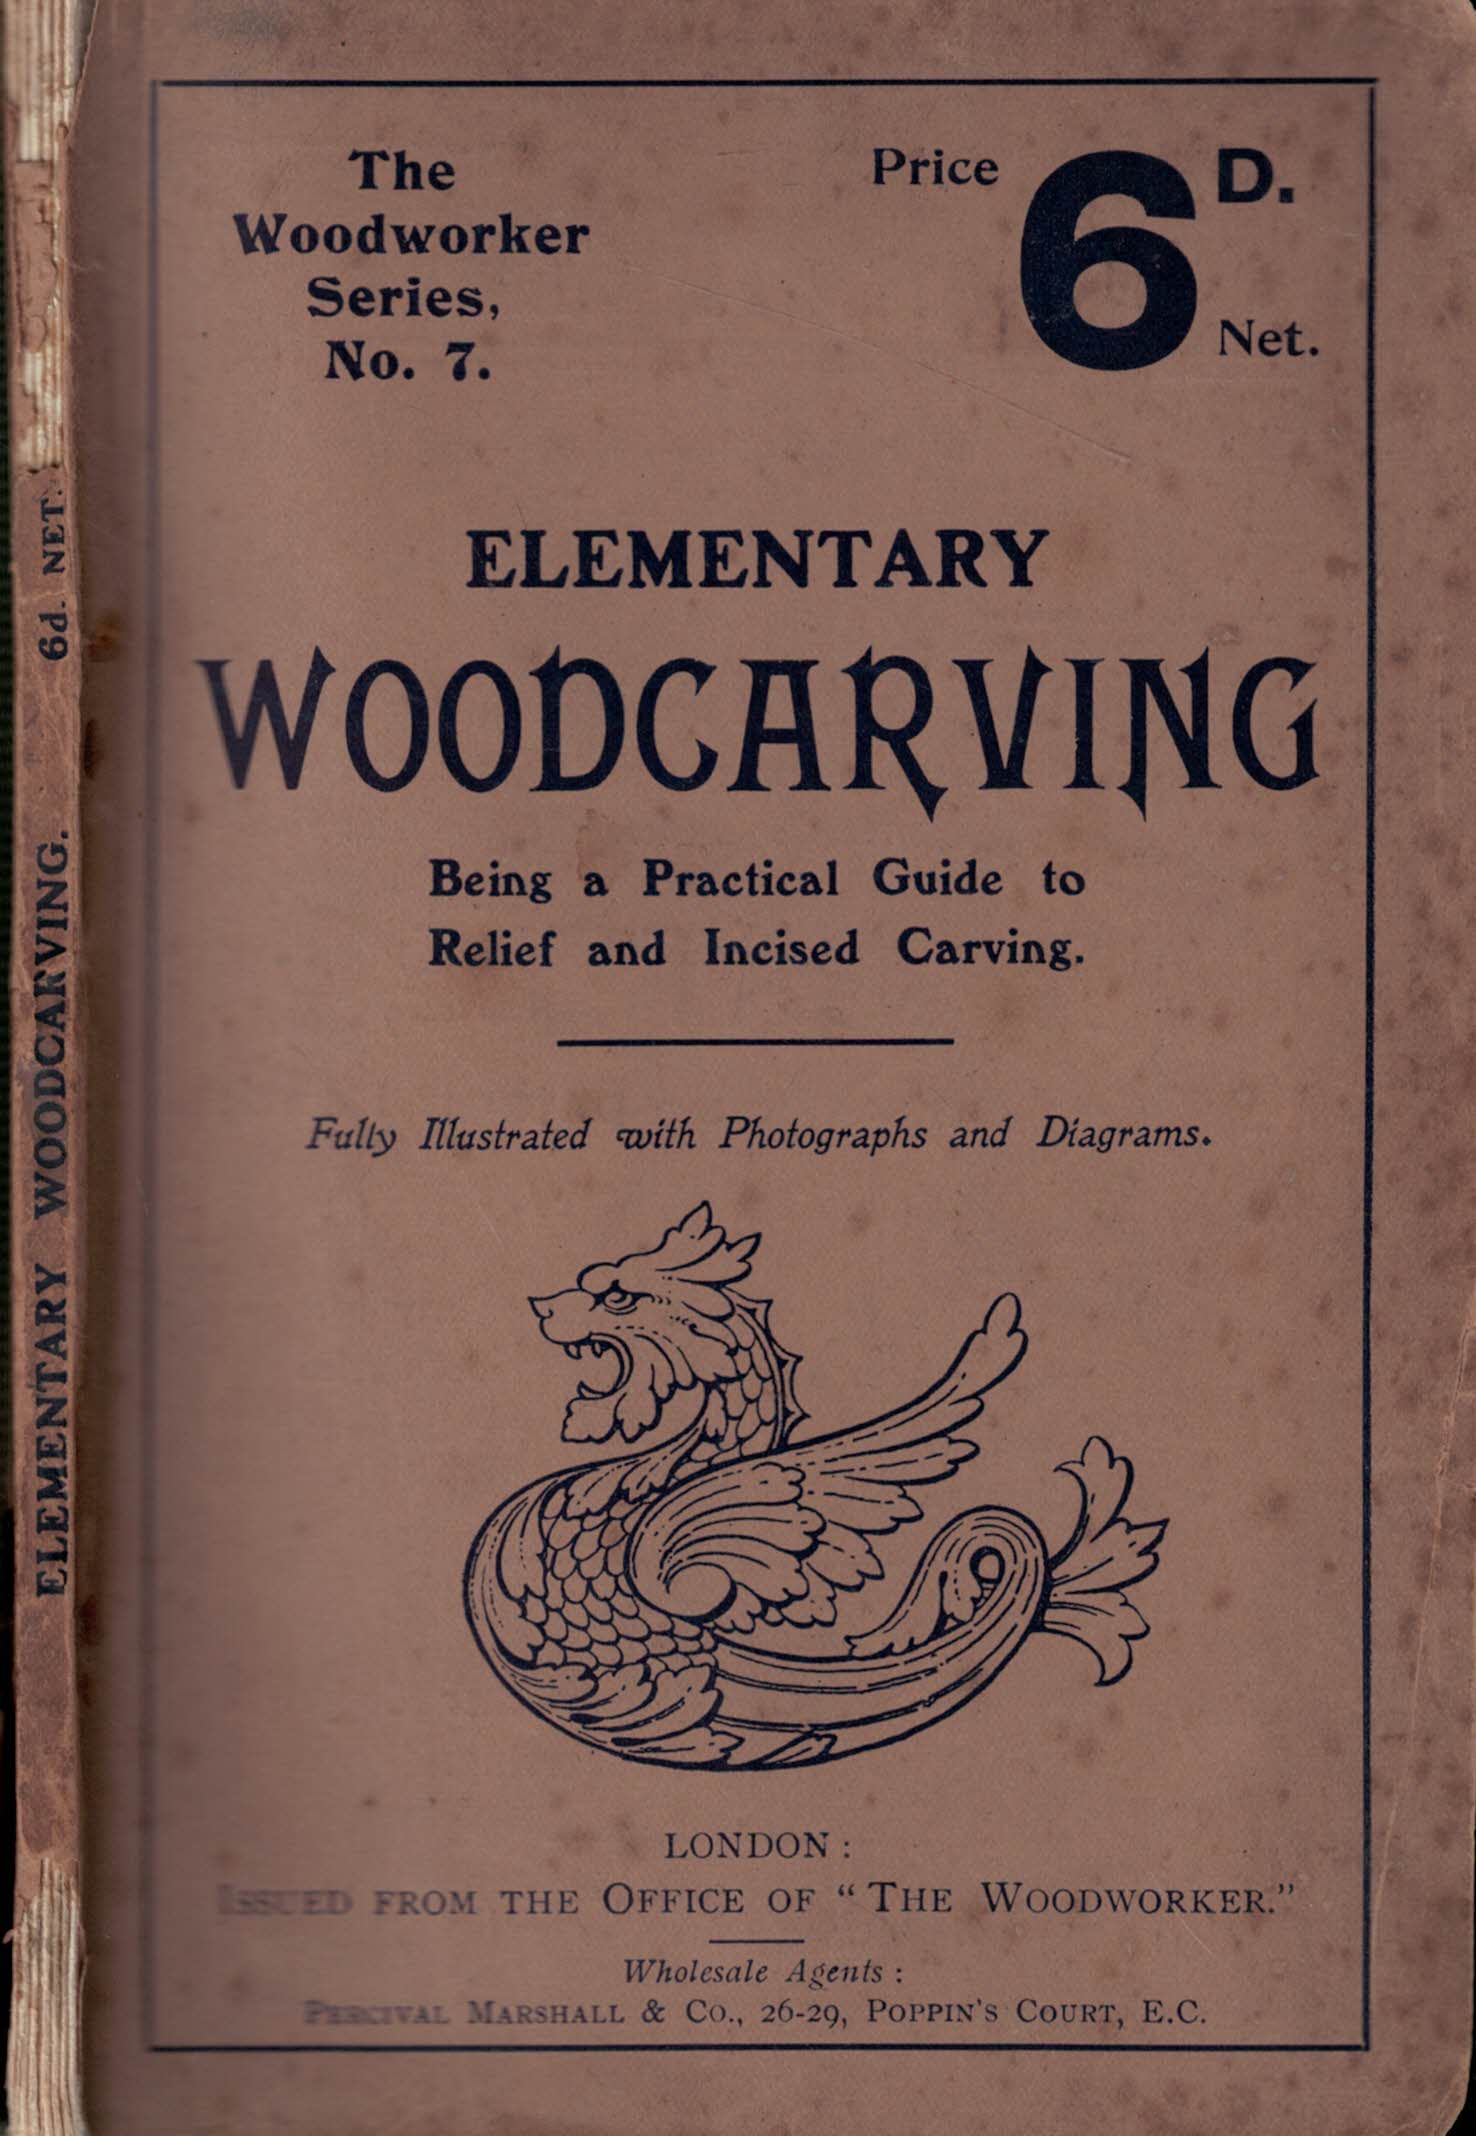 Elementary Woodcarving. The Woodworker series No 7.